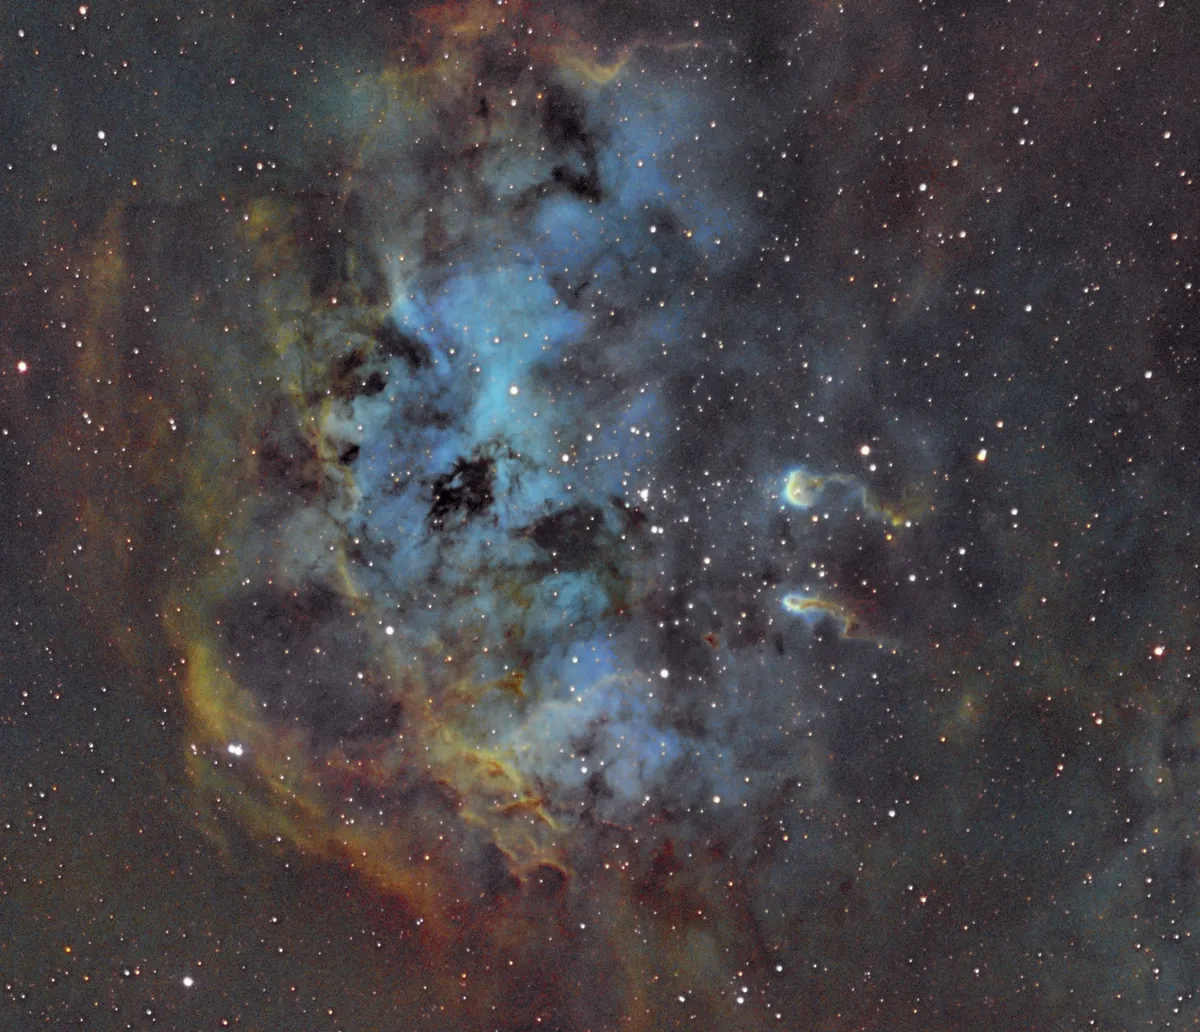 IC410 - Cosmic Tadpoles by Stewart Wilson, Enfield, N London, UK. Equipment: Skywatcher Quattro 250mm, Zwo ASI1600-MM-Cool, Chroma 3nm Narrowband Filters, 10 Micron GM-1000 HPS Mount